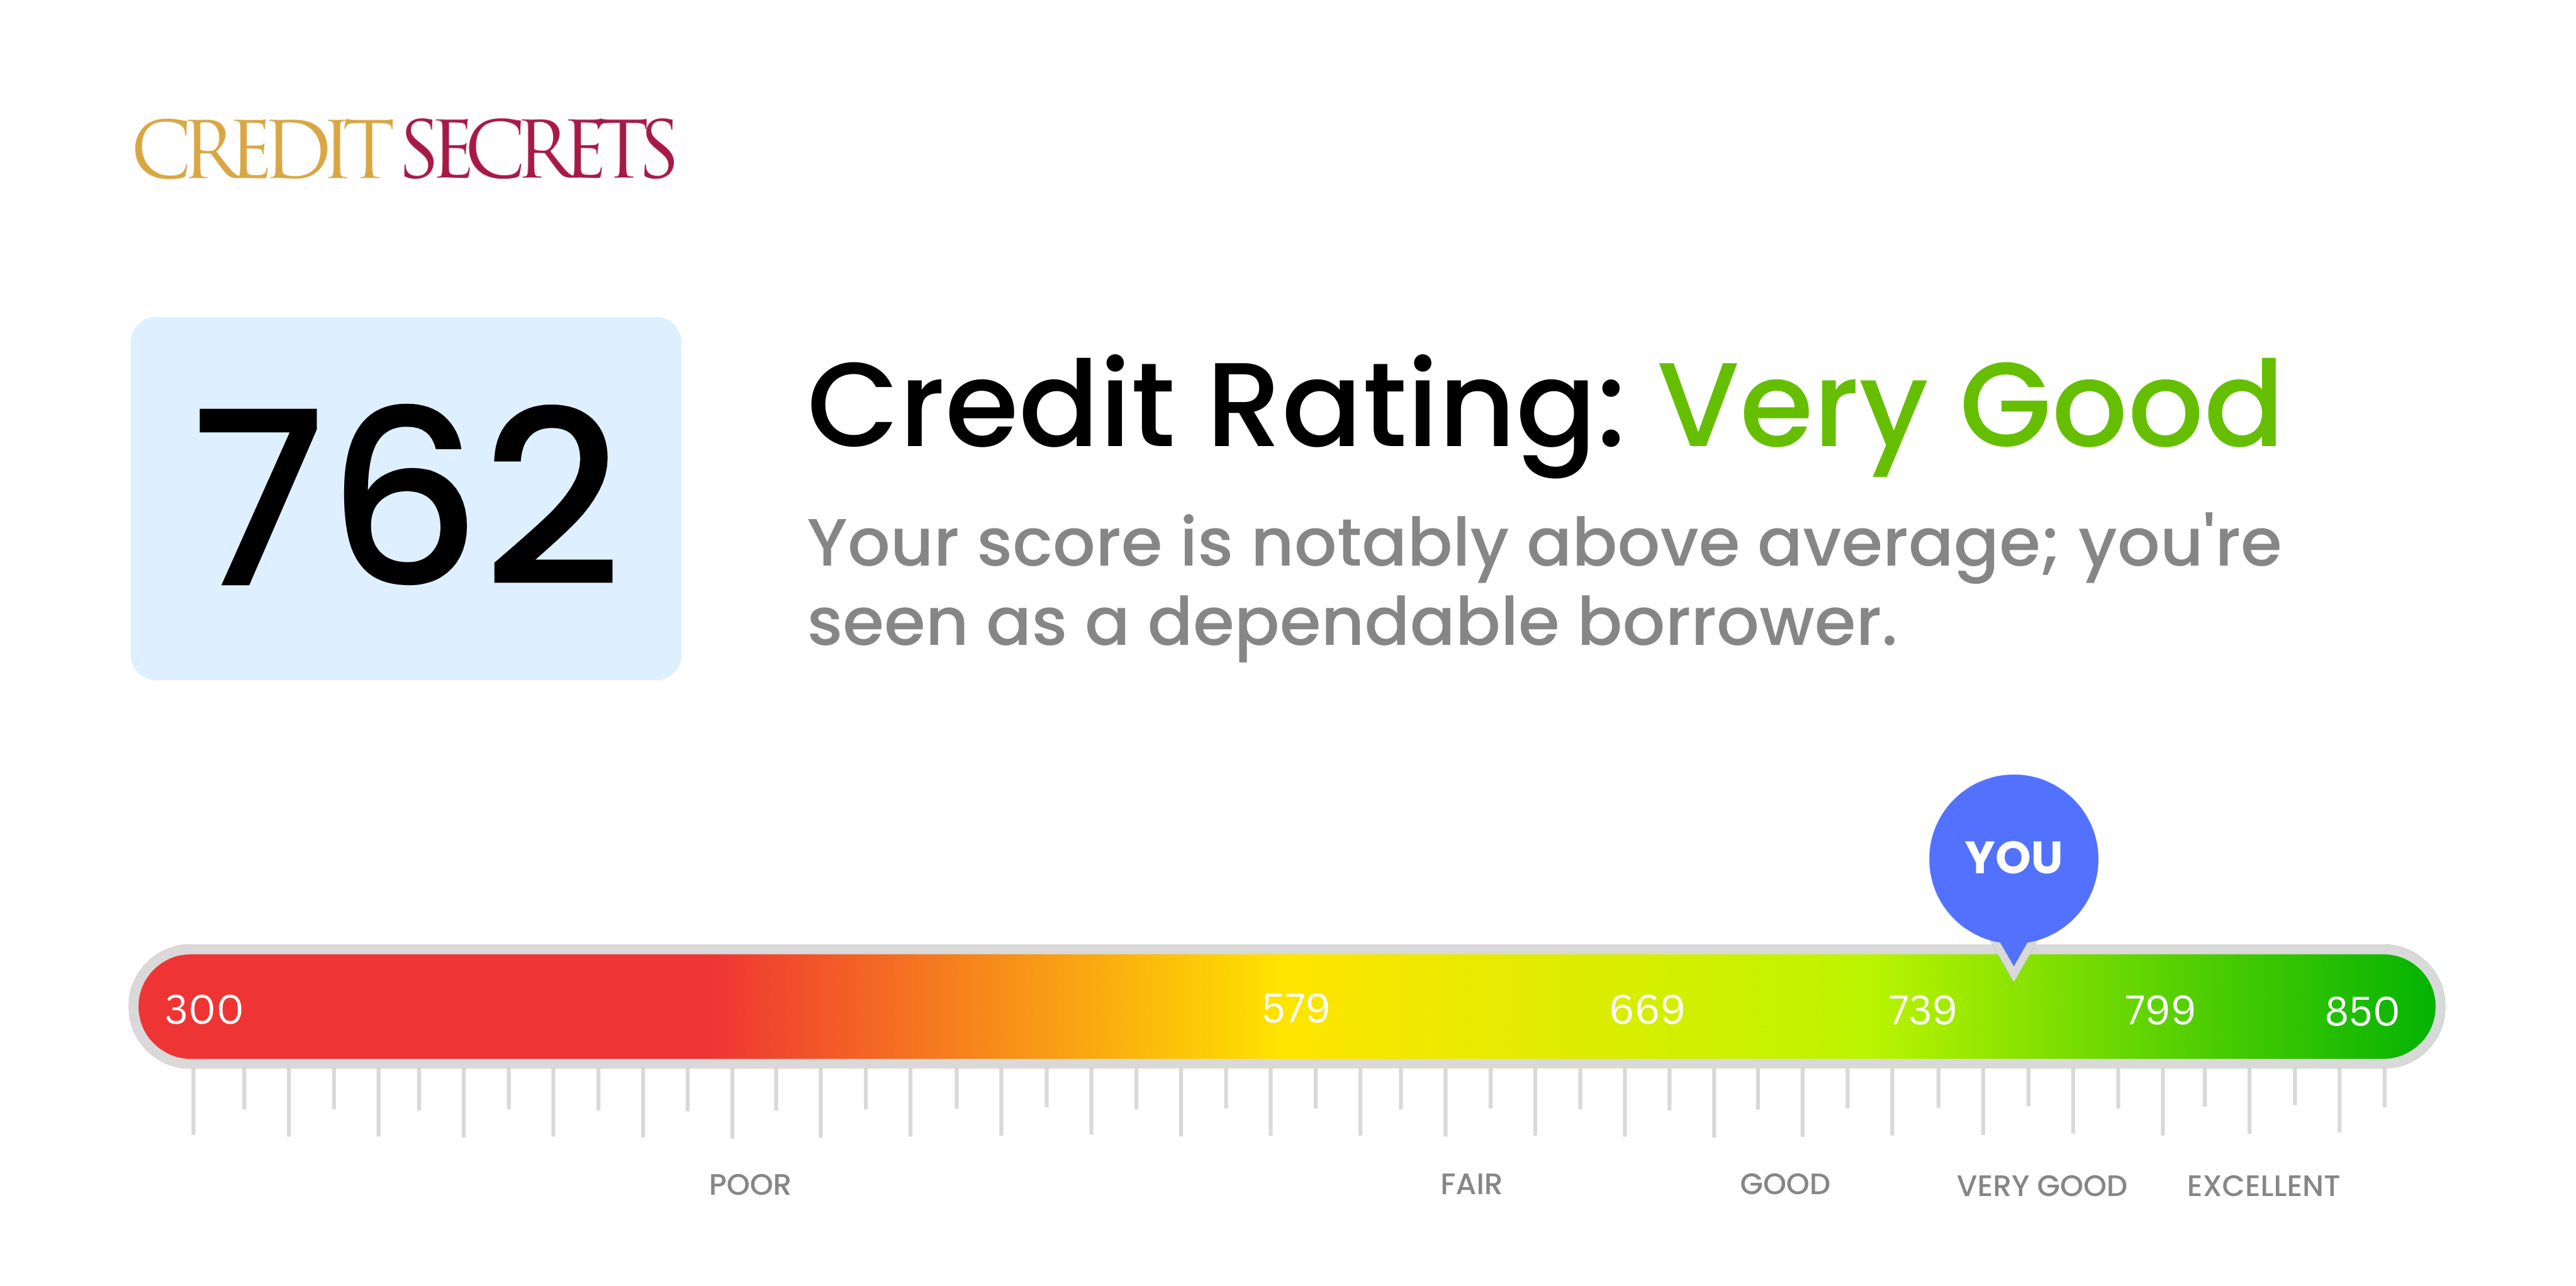 Is 762 a good credit score?